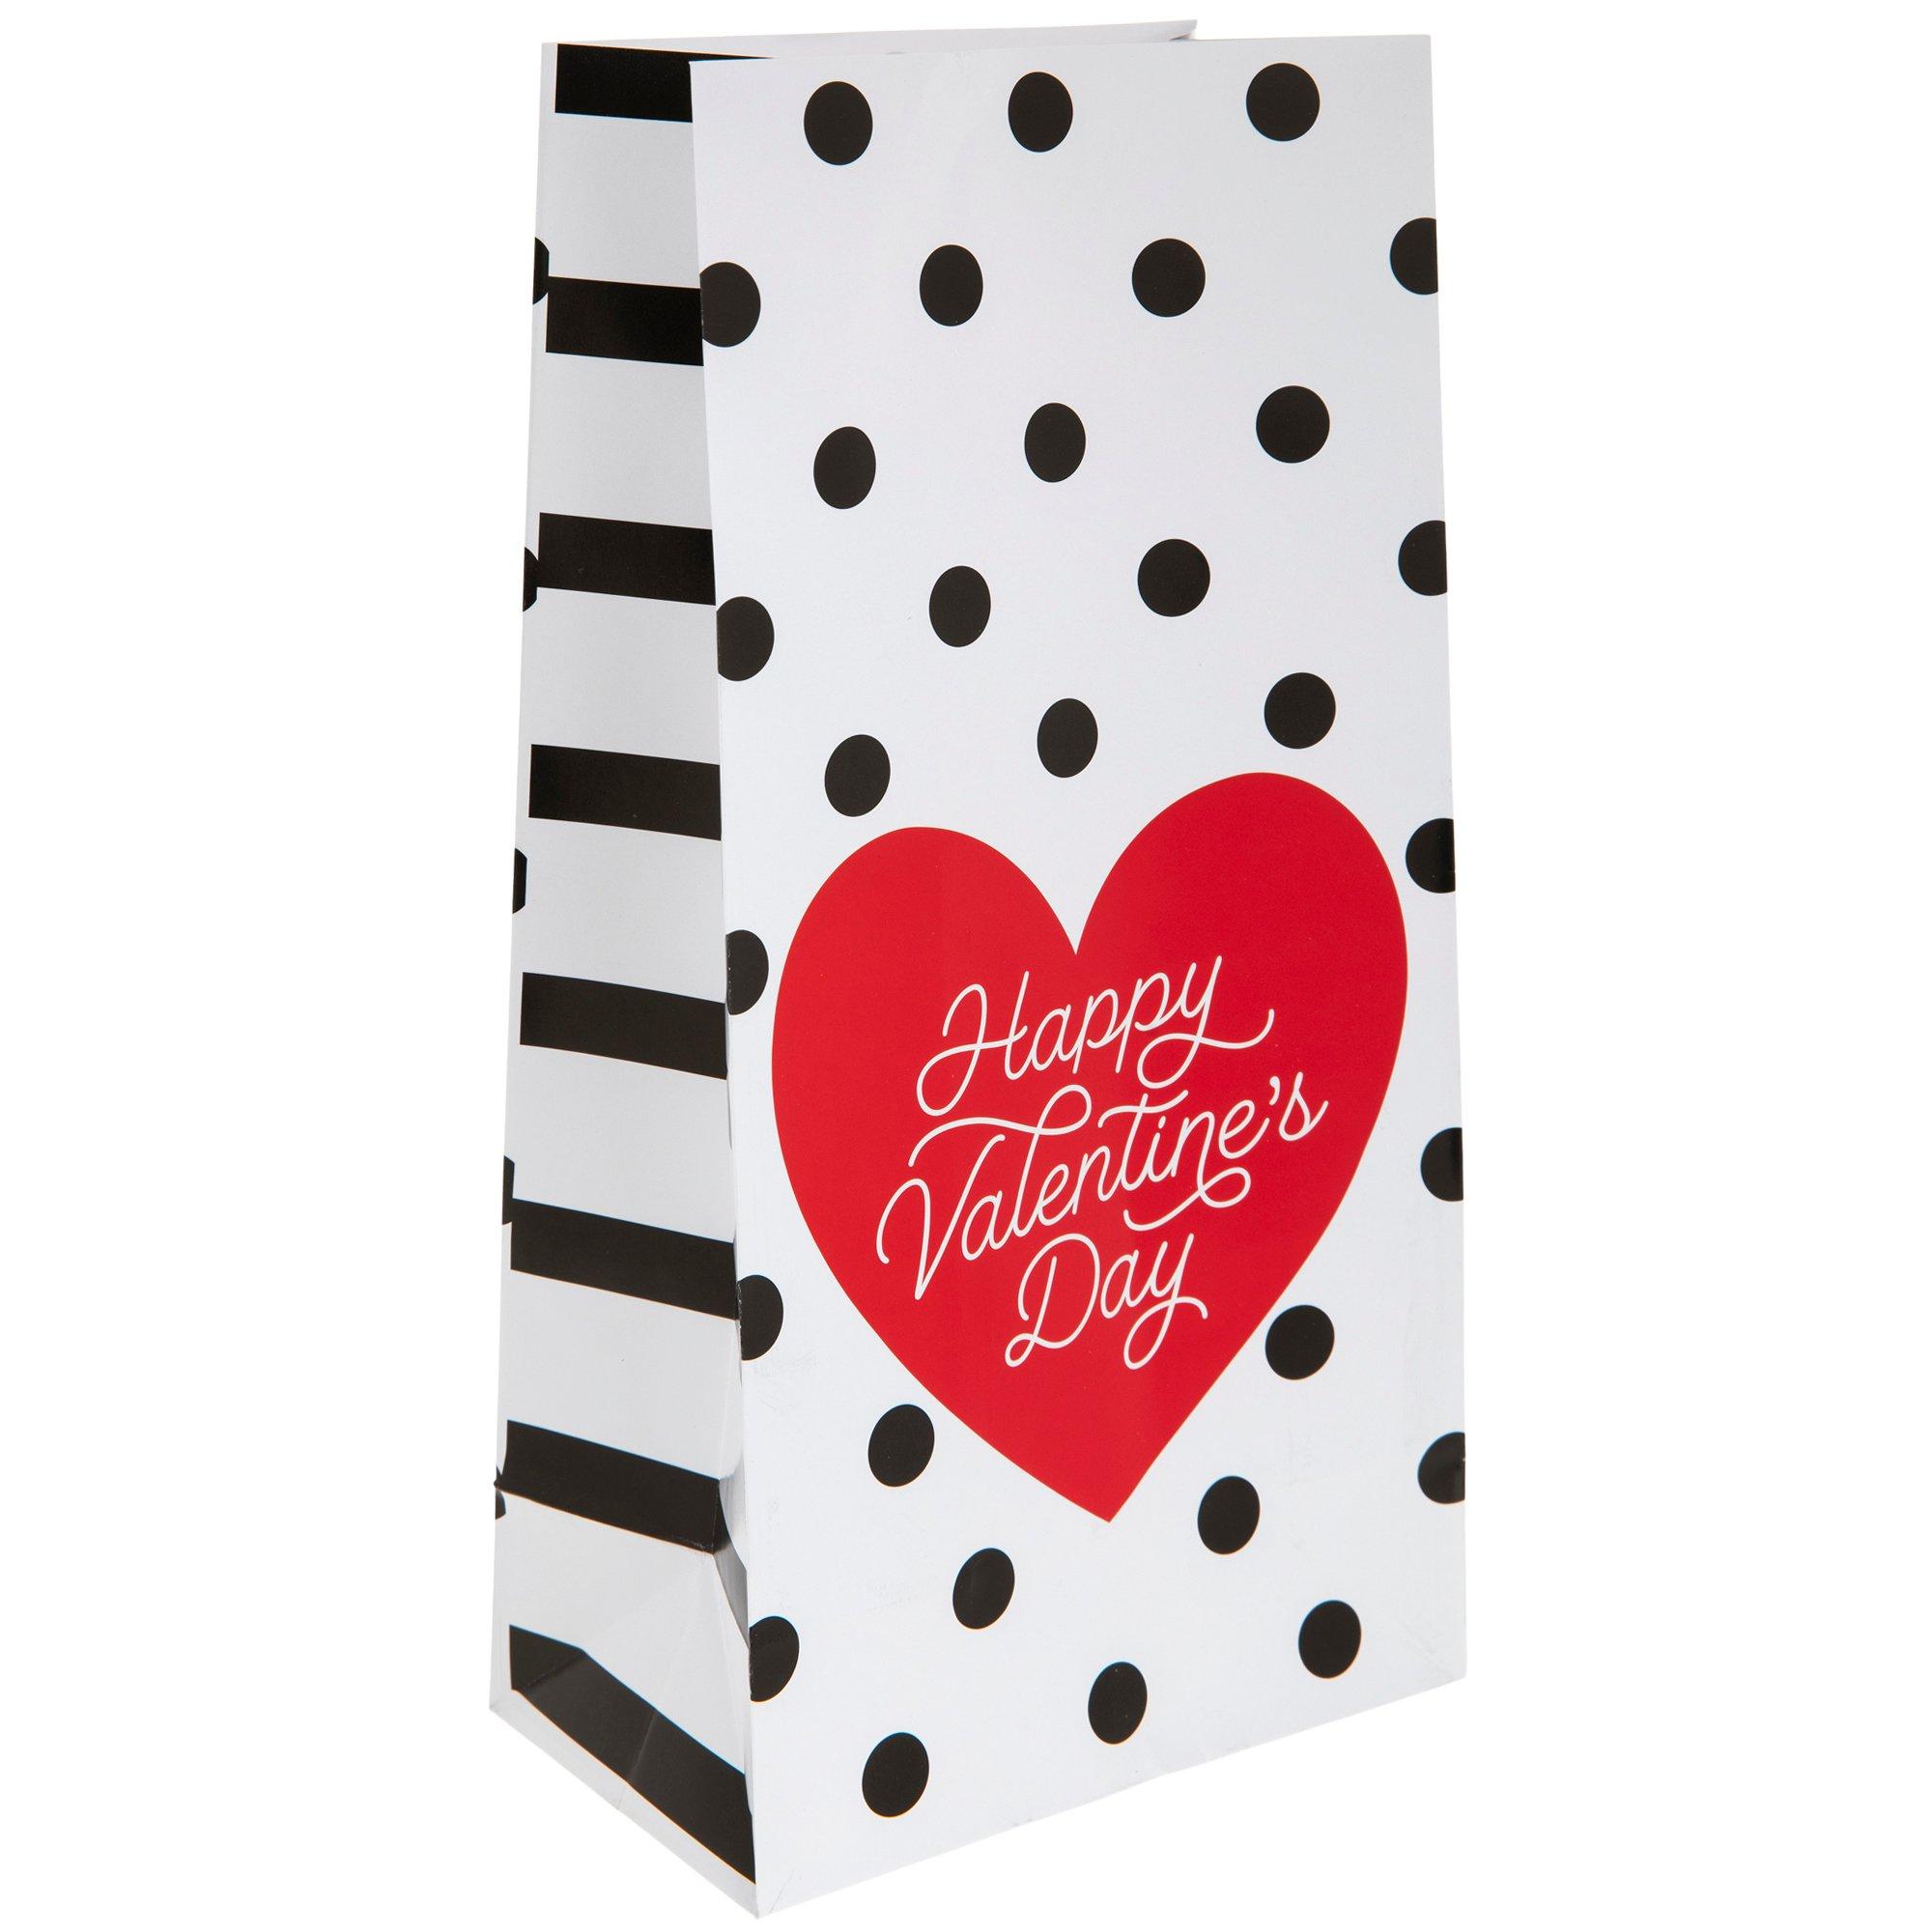 Patterned Valentine's Day Cards